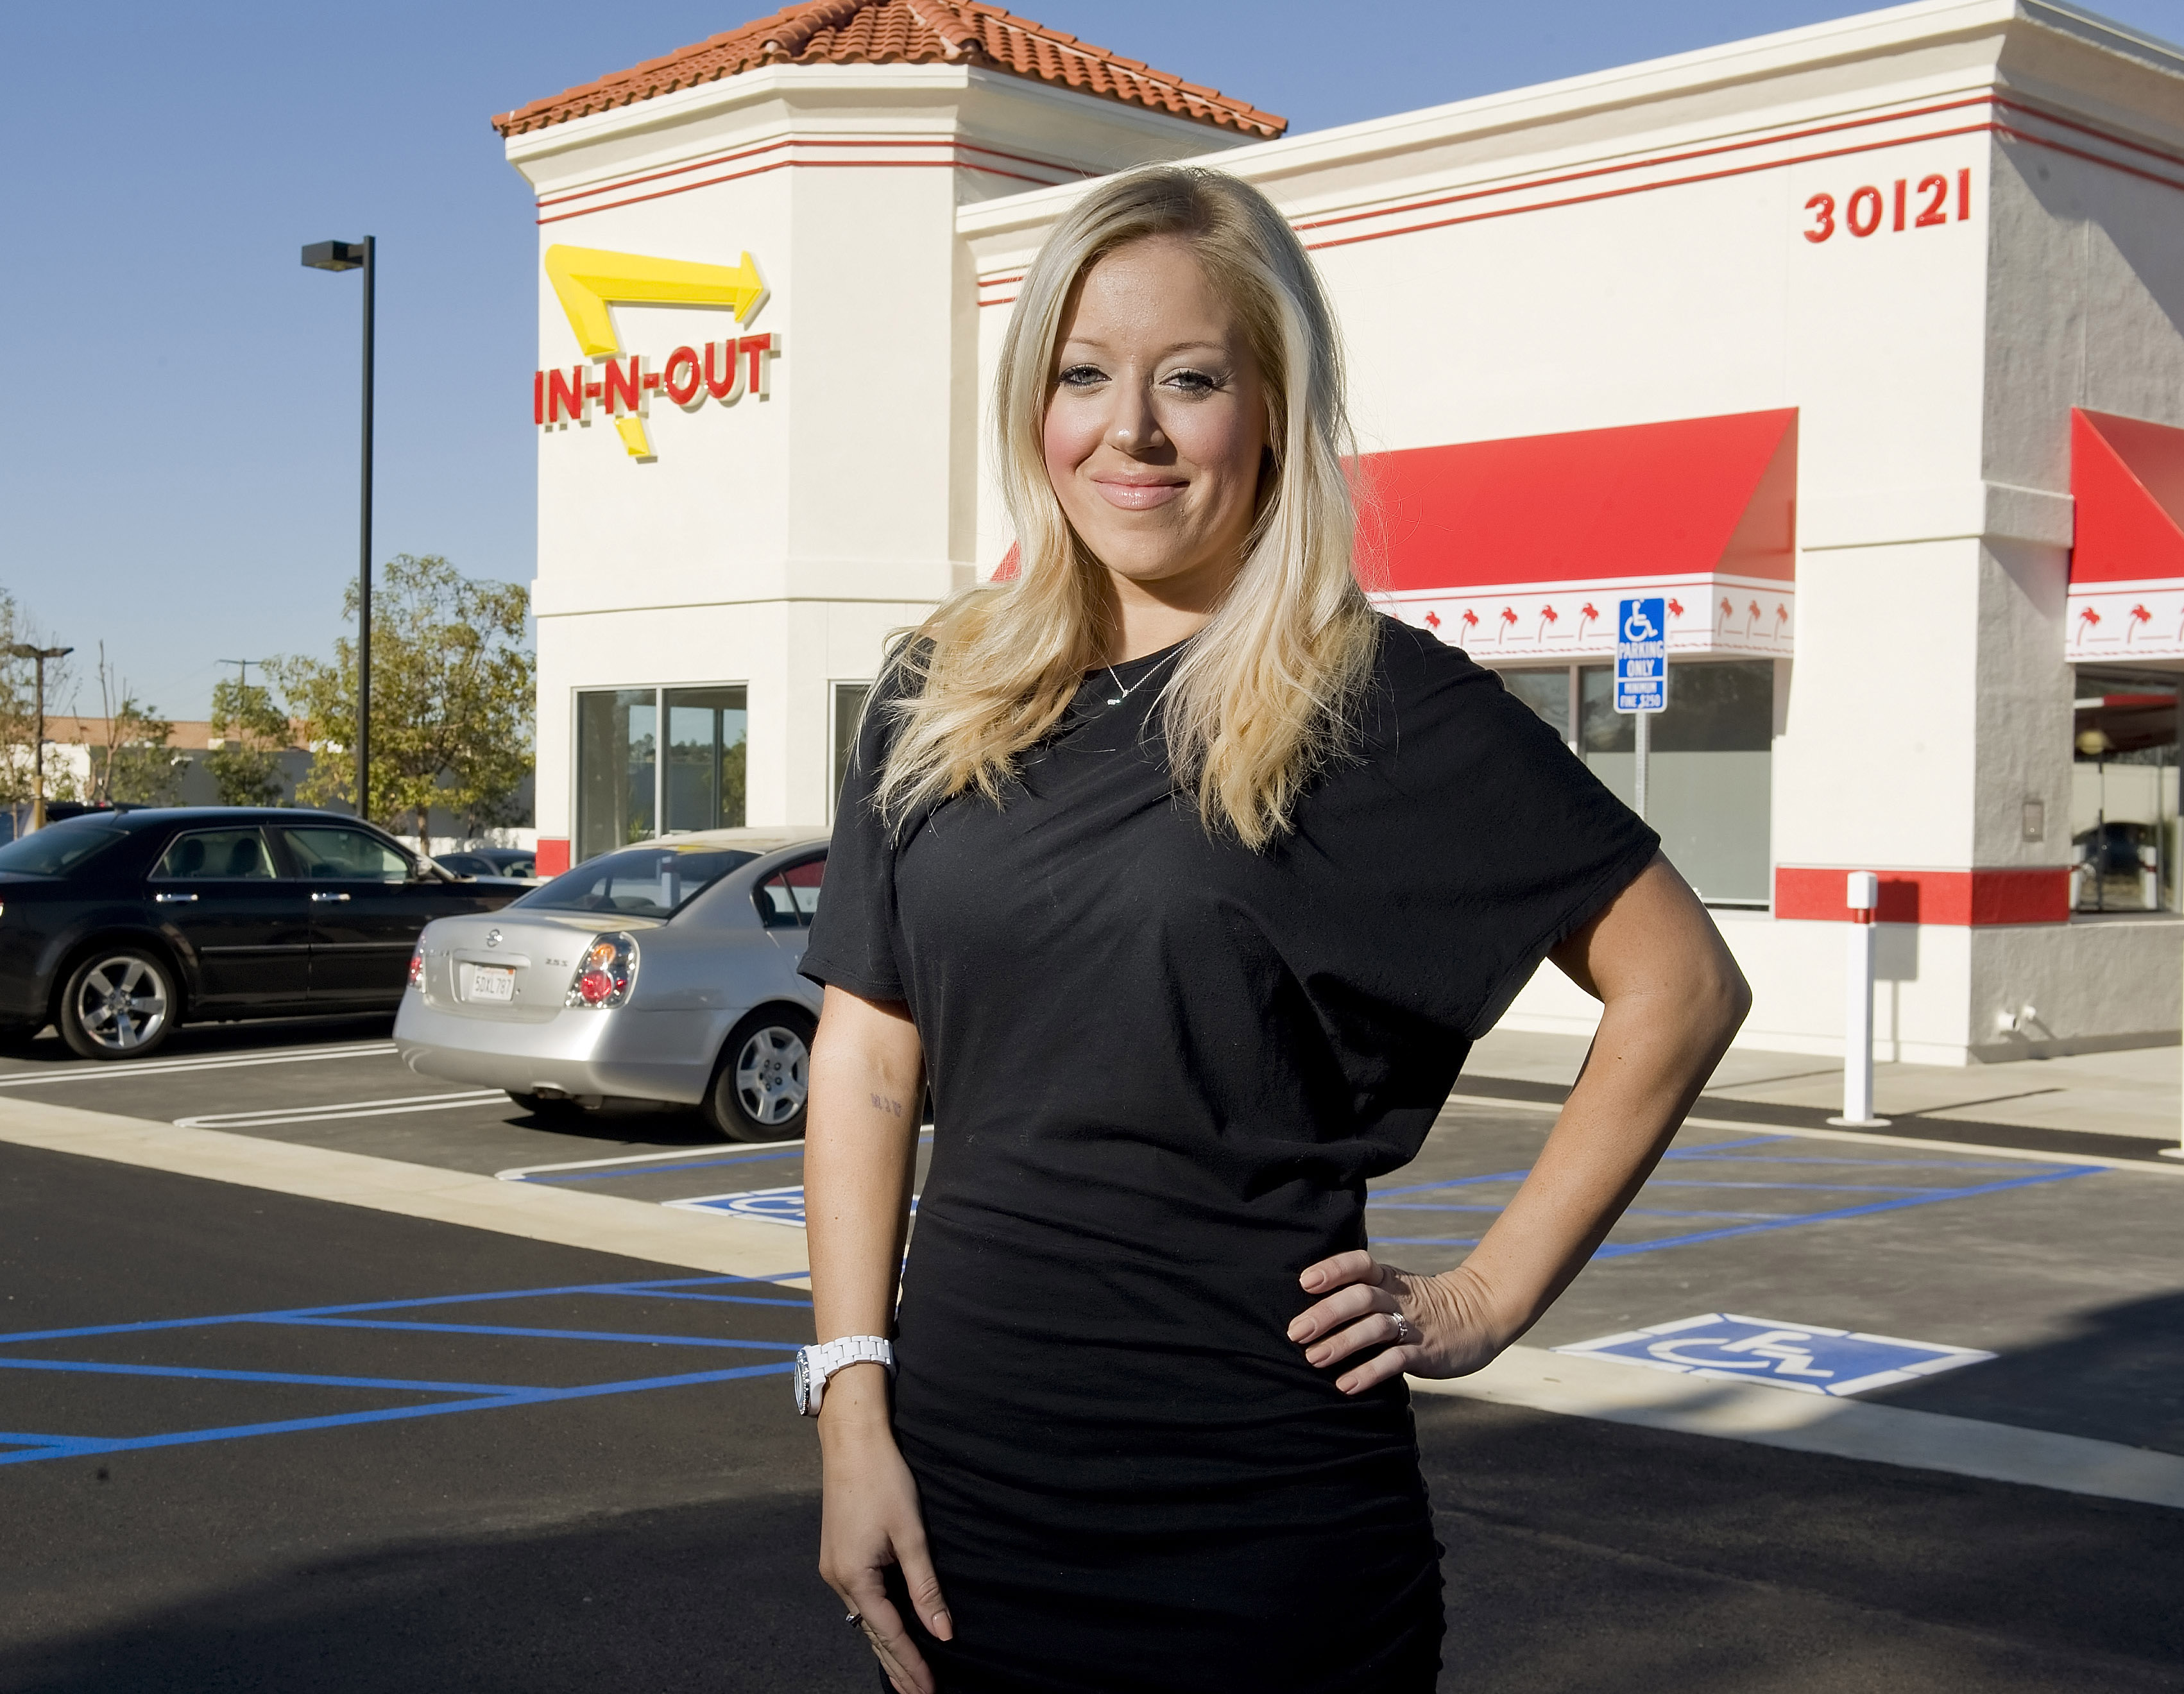 In-N-Out Burger's Lynsi Snyder Is the Best Female CEO in America, According to an Analysis of More Than a Million Glassdoor Reviews